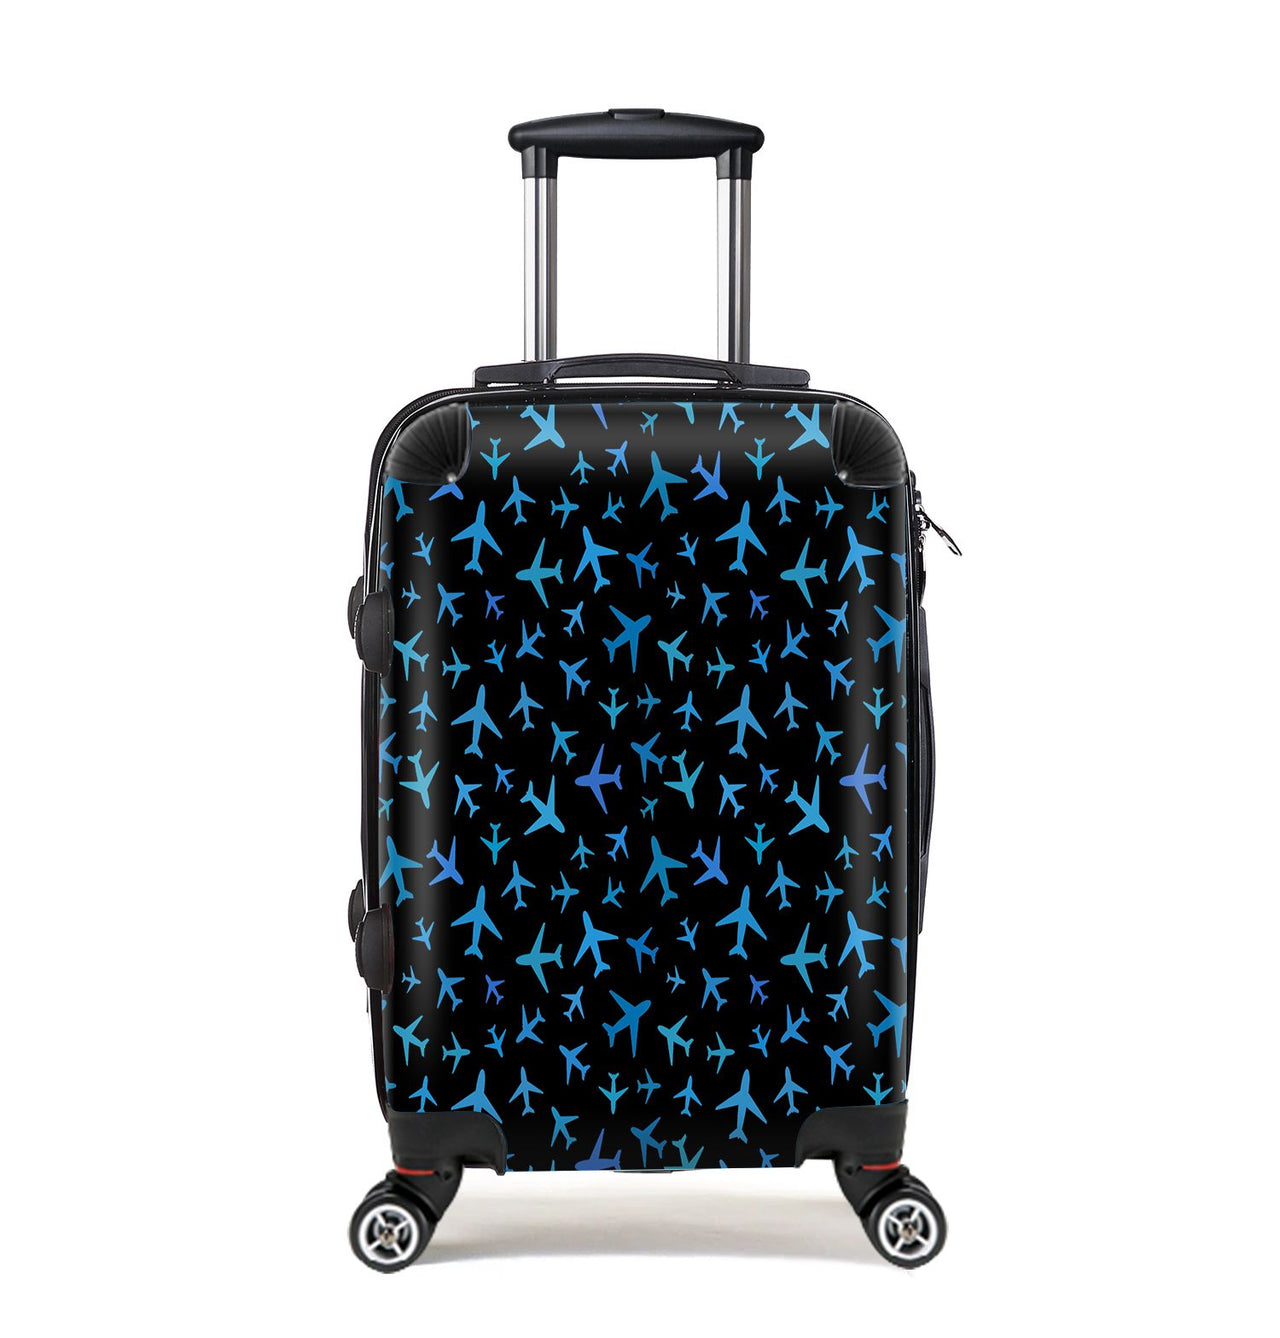 Many Airplanes Black Designed Cabin Size Luggages